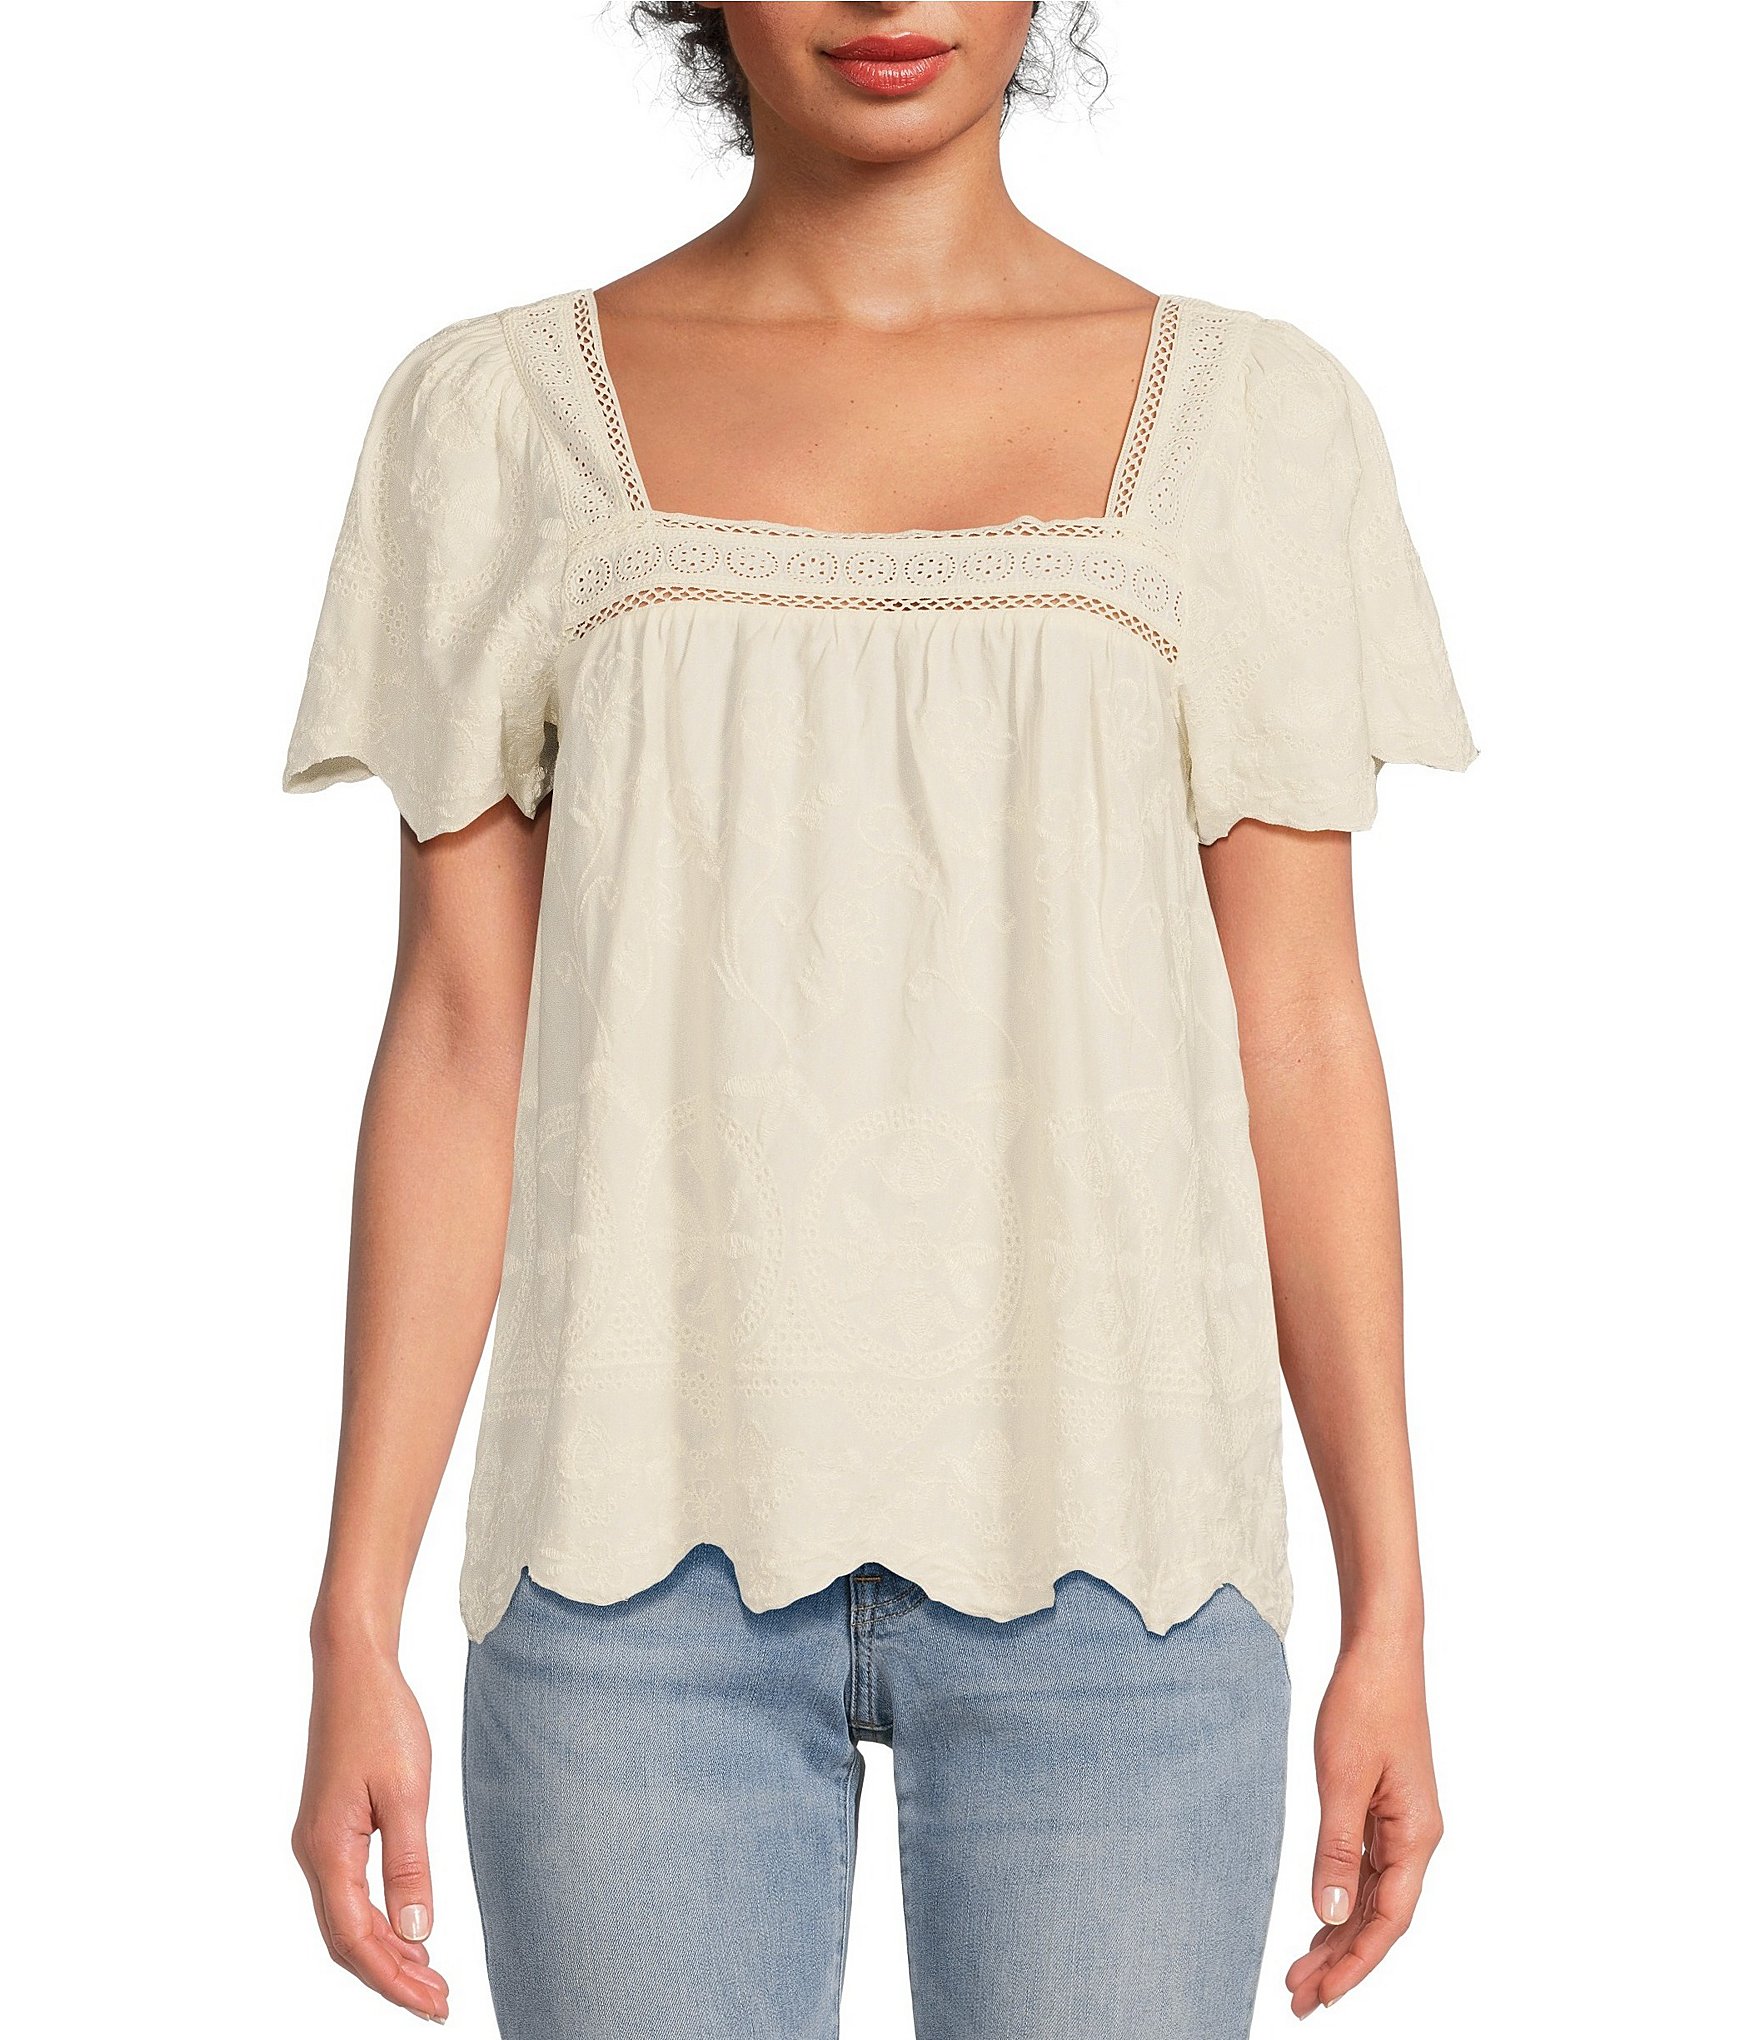 Lucky Brand womens Tonal Embroidered Square Neck Blouse